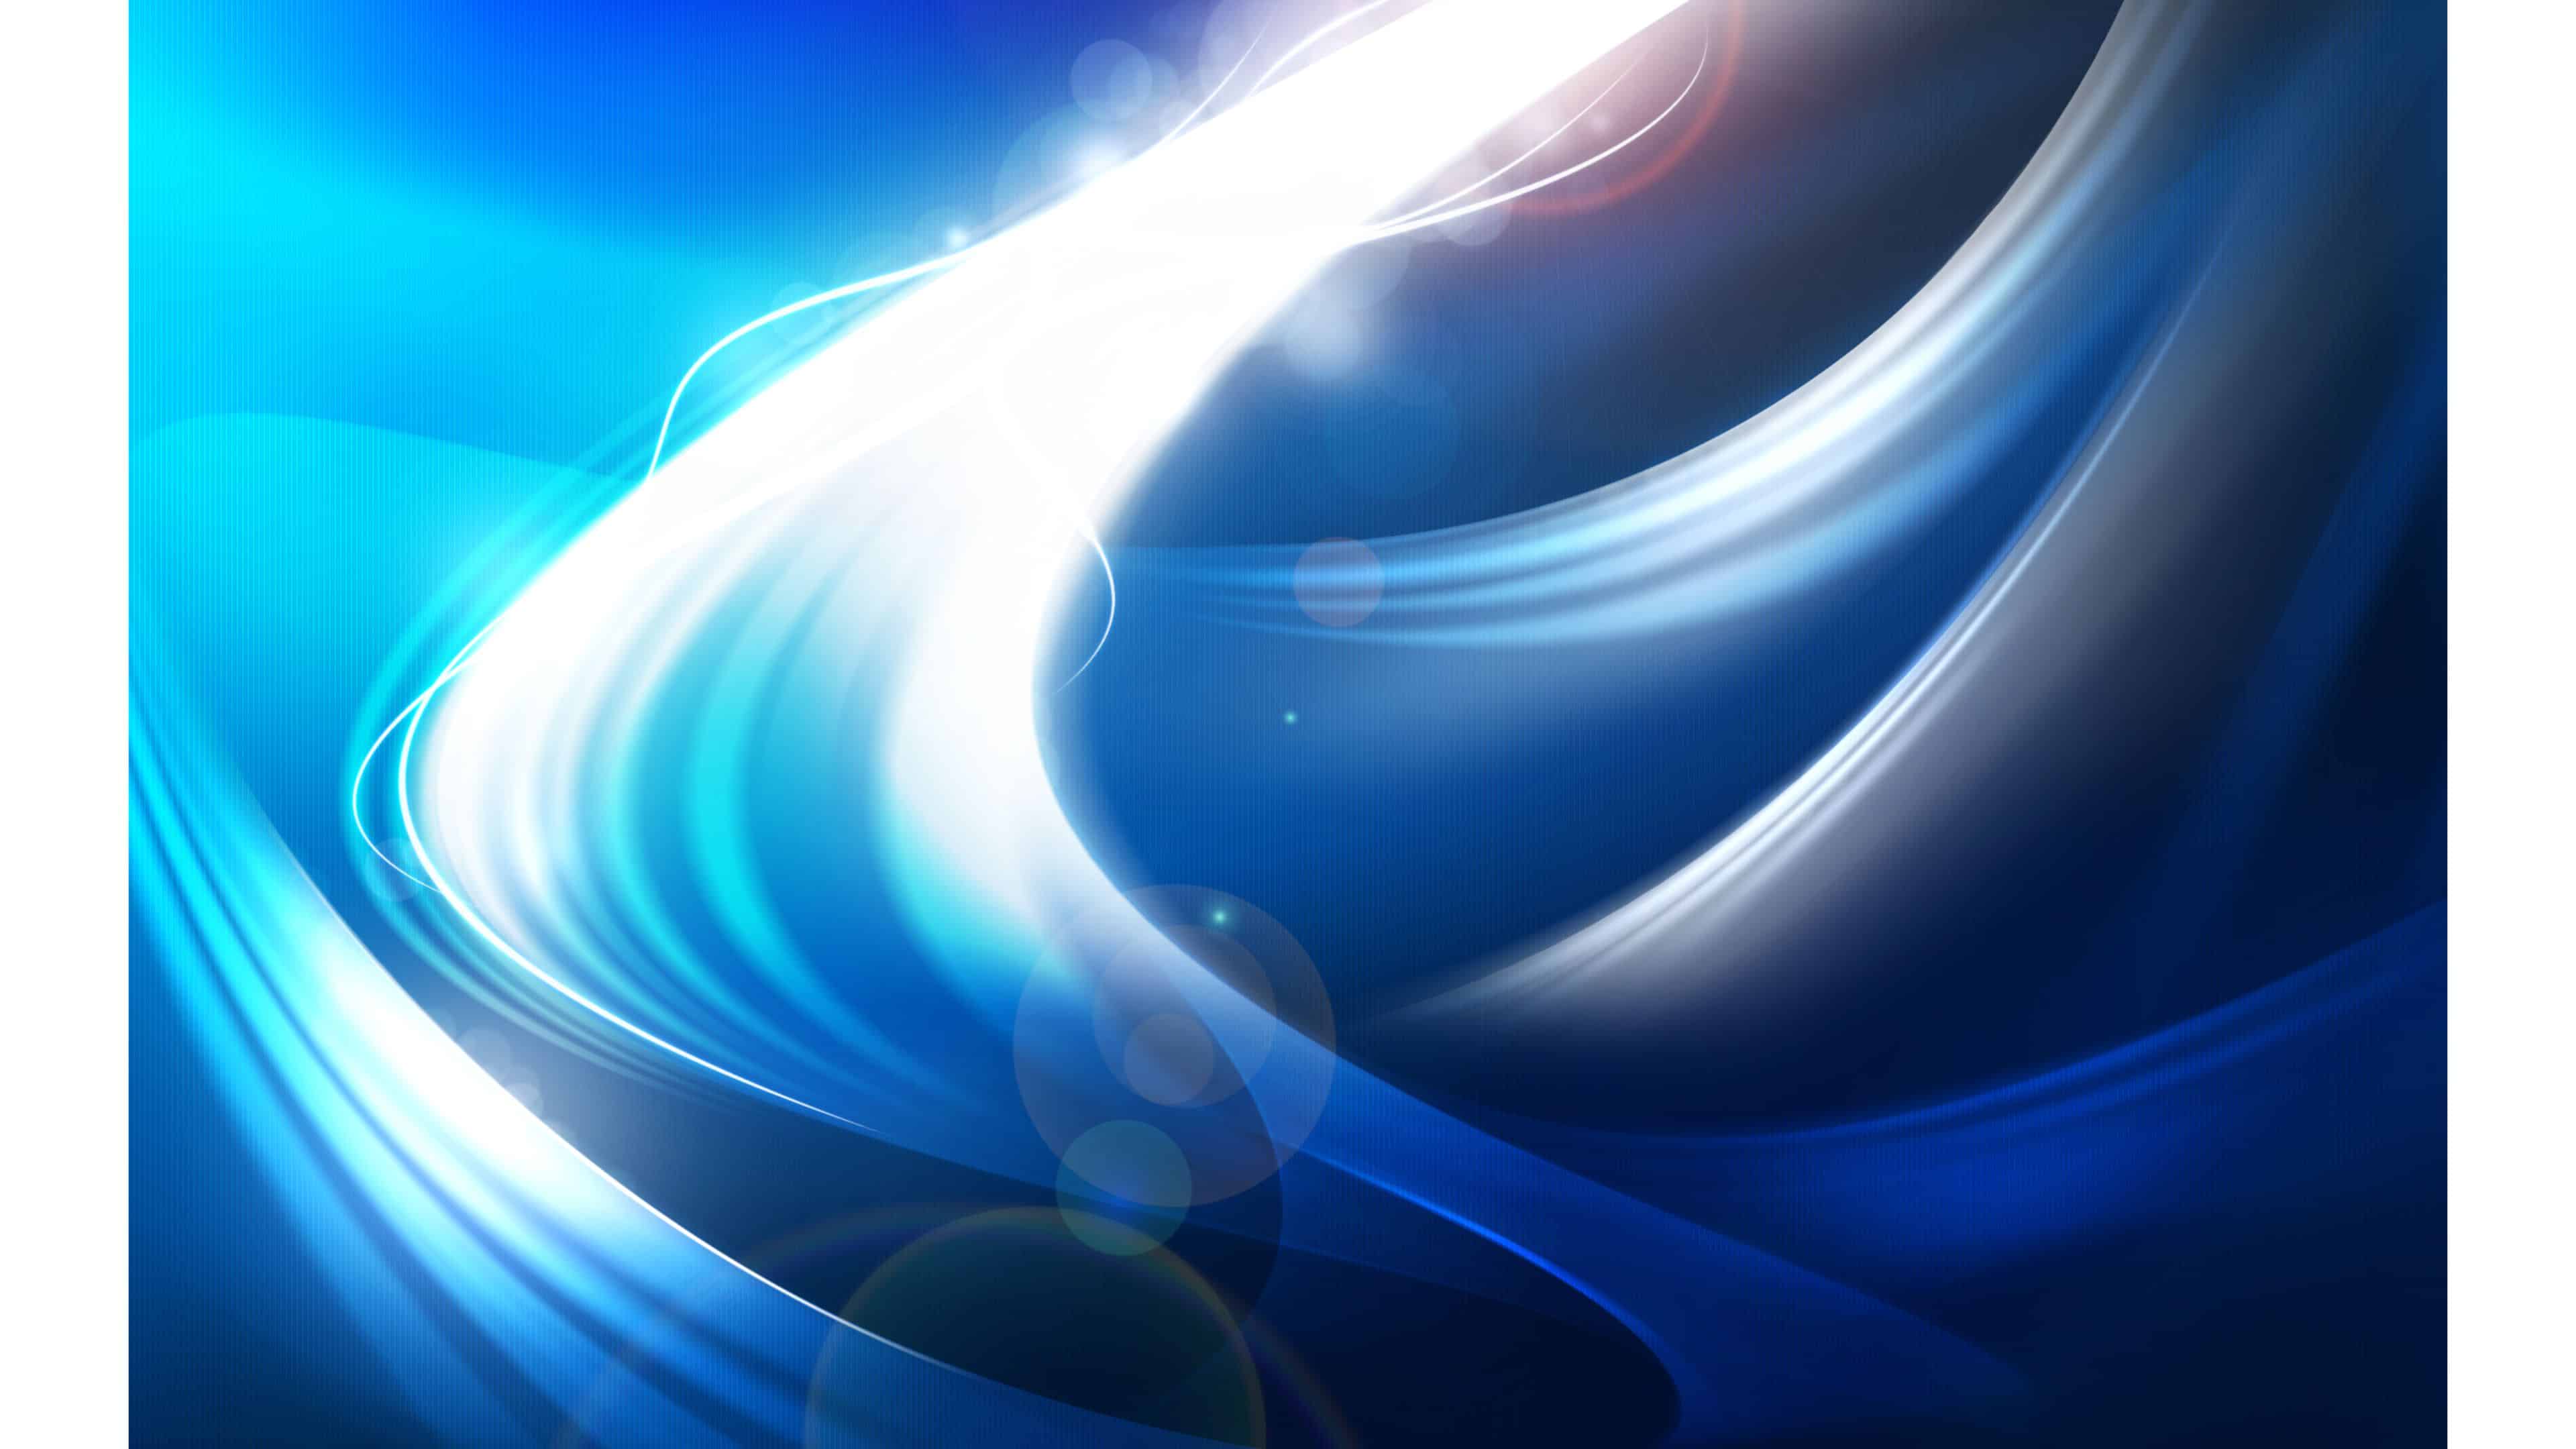 White Waves Of Blue Abstract 4k High Definition Wallpaper